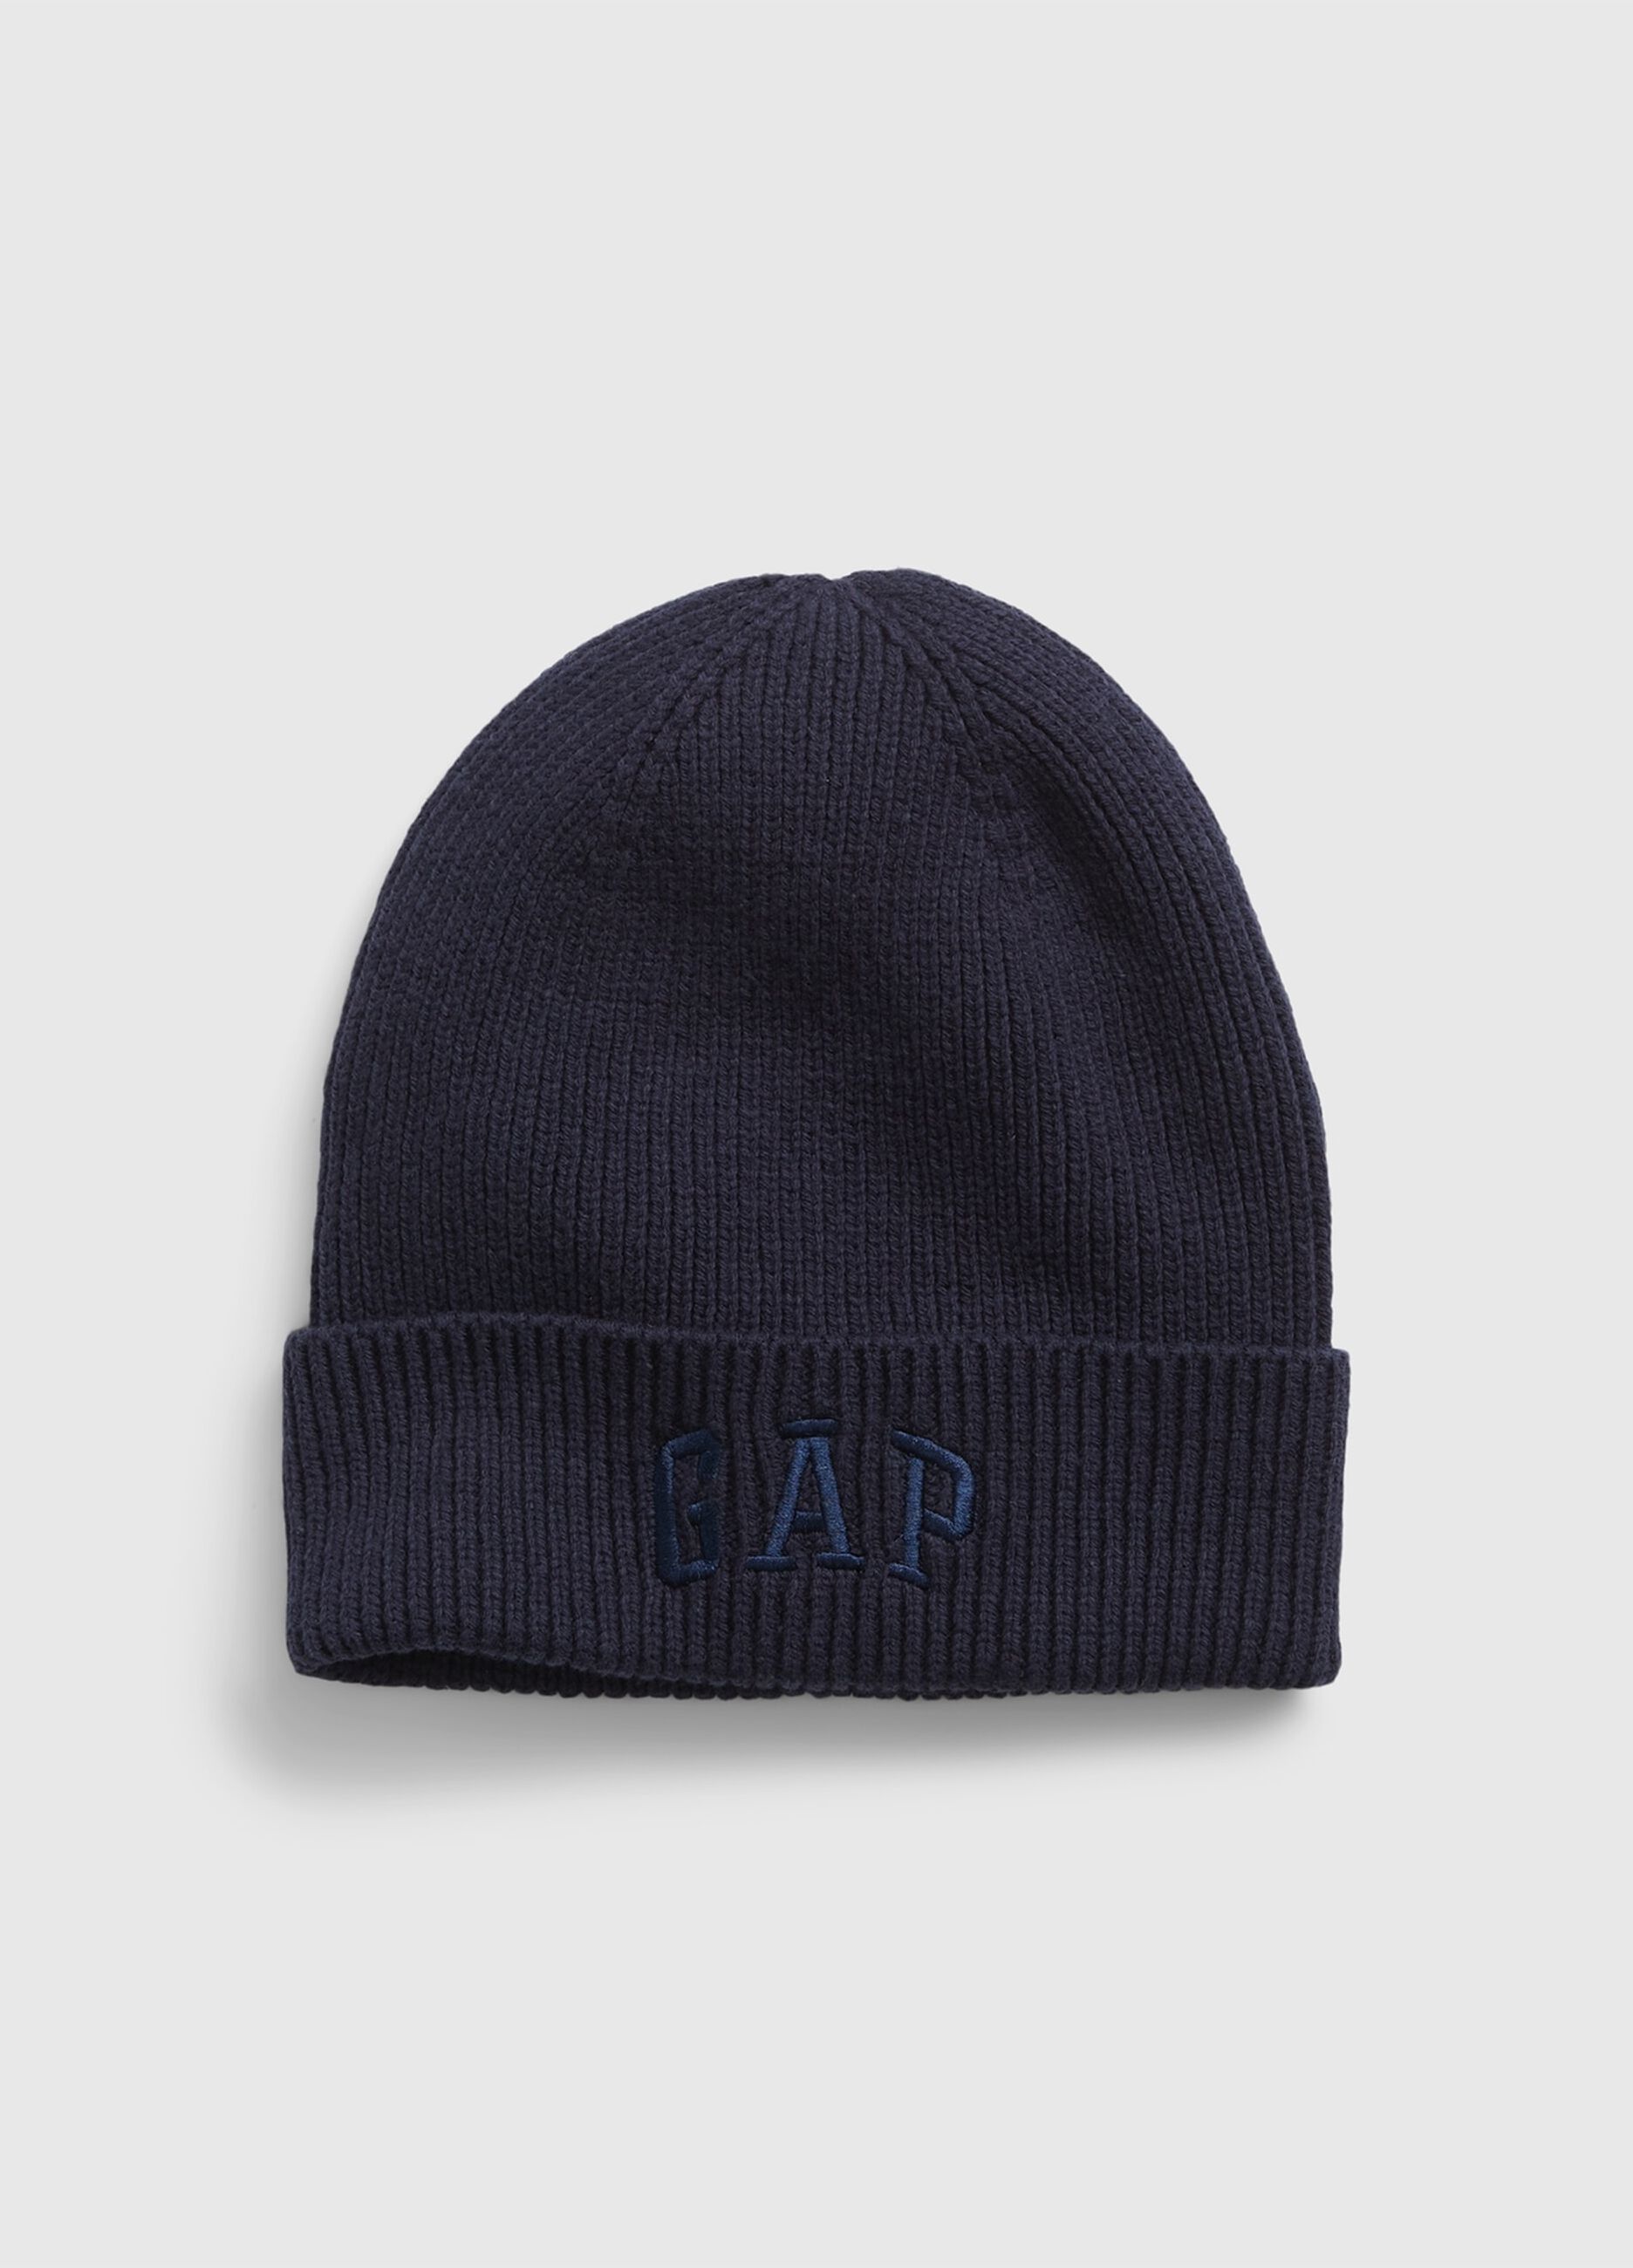 Knit cap with logo embroidery